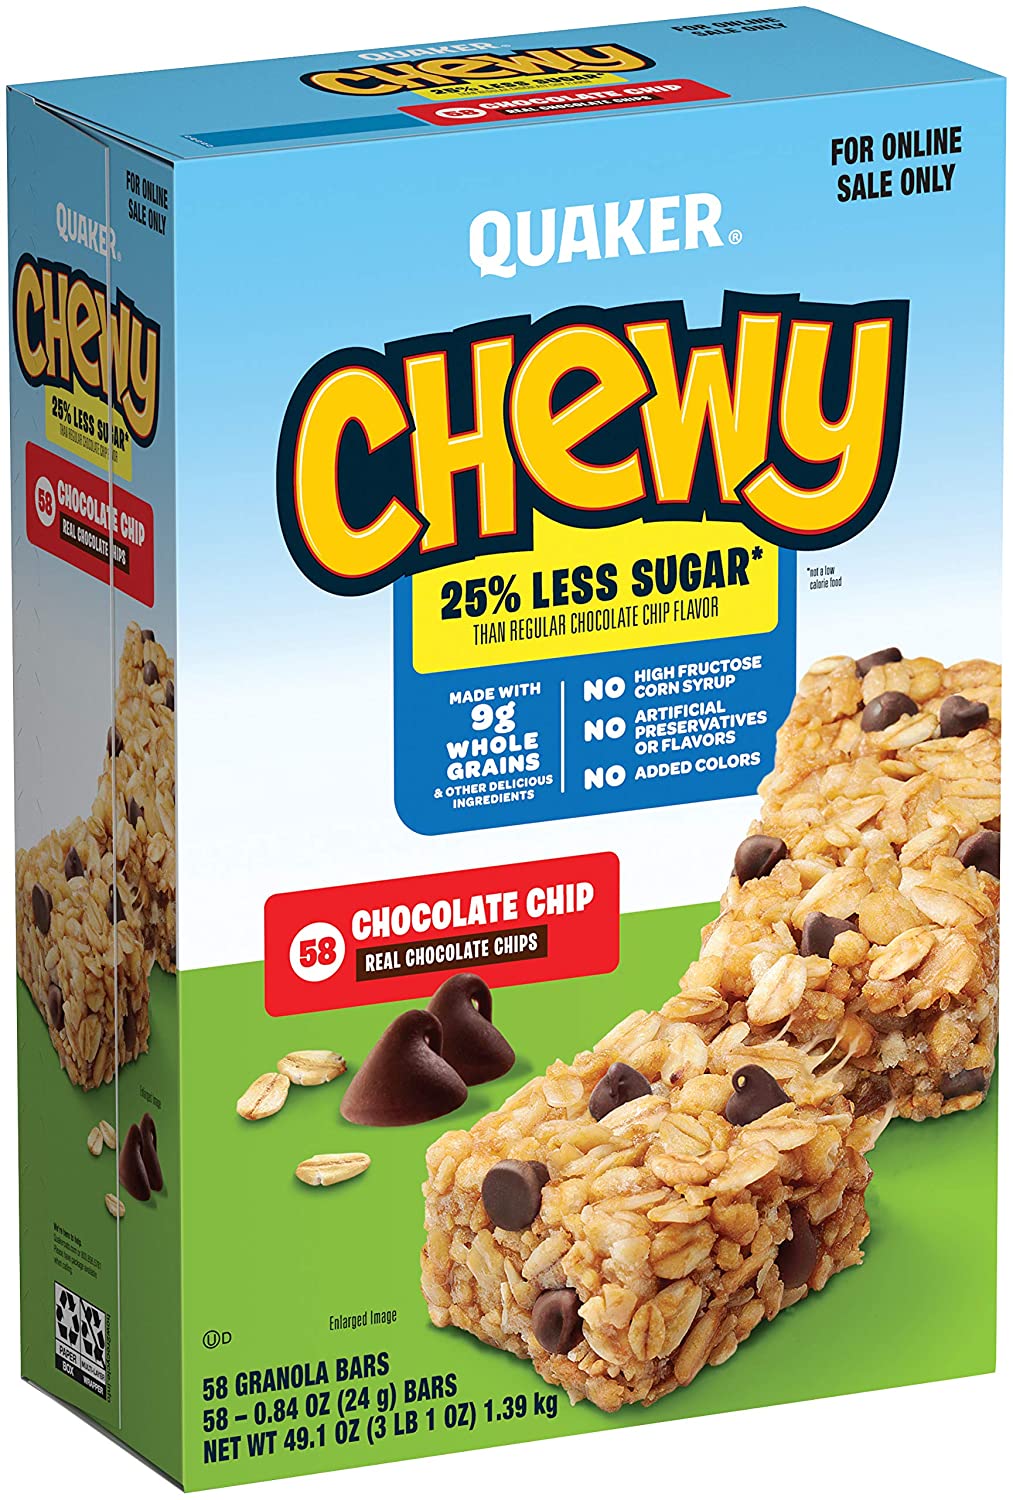 Quaker Chewy Granola Bars, Chocolate Chip, (58 Pack) for Only $3.62 ...